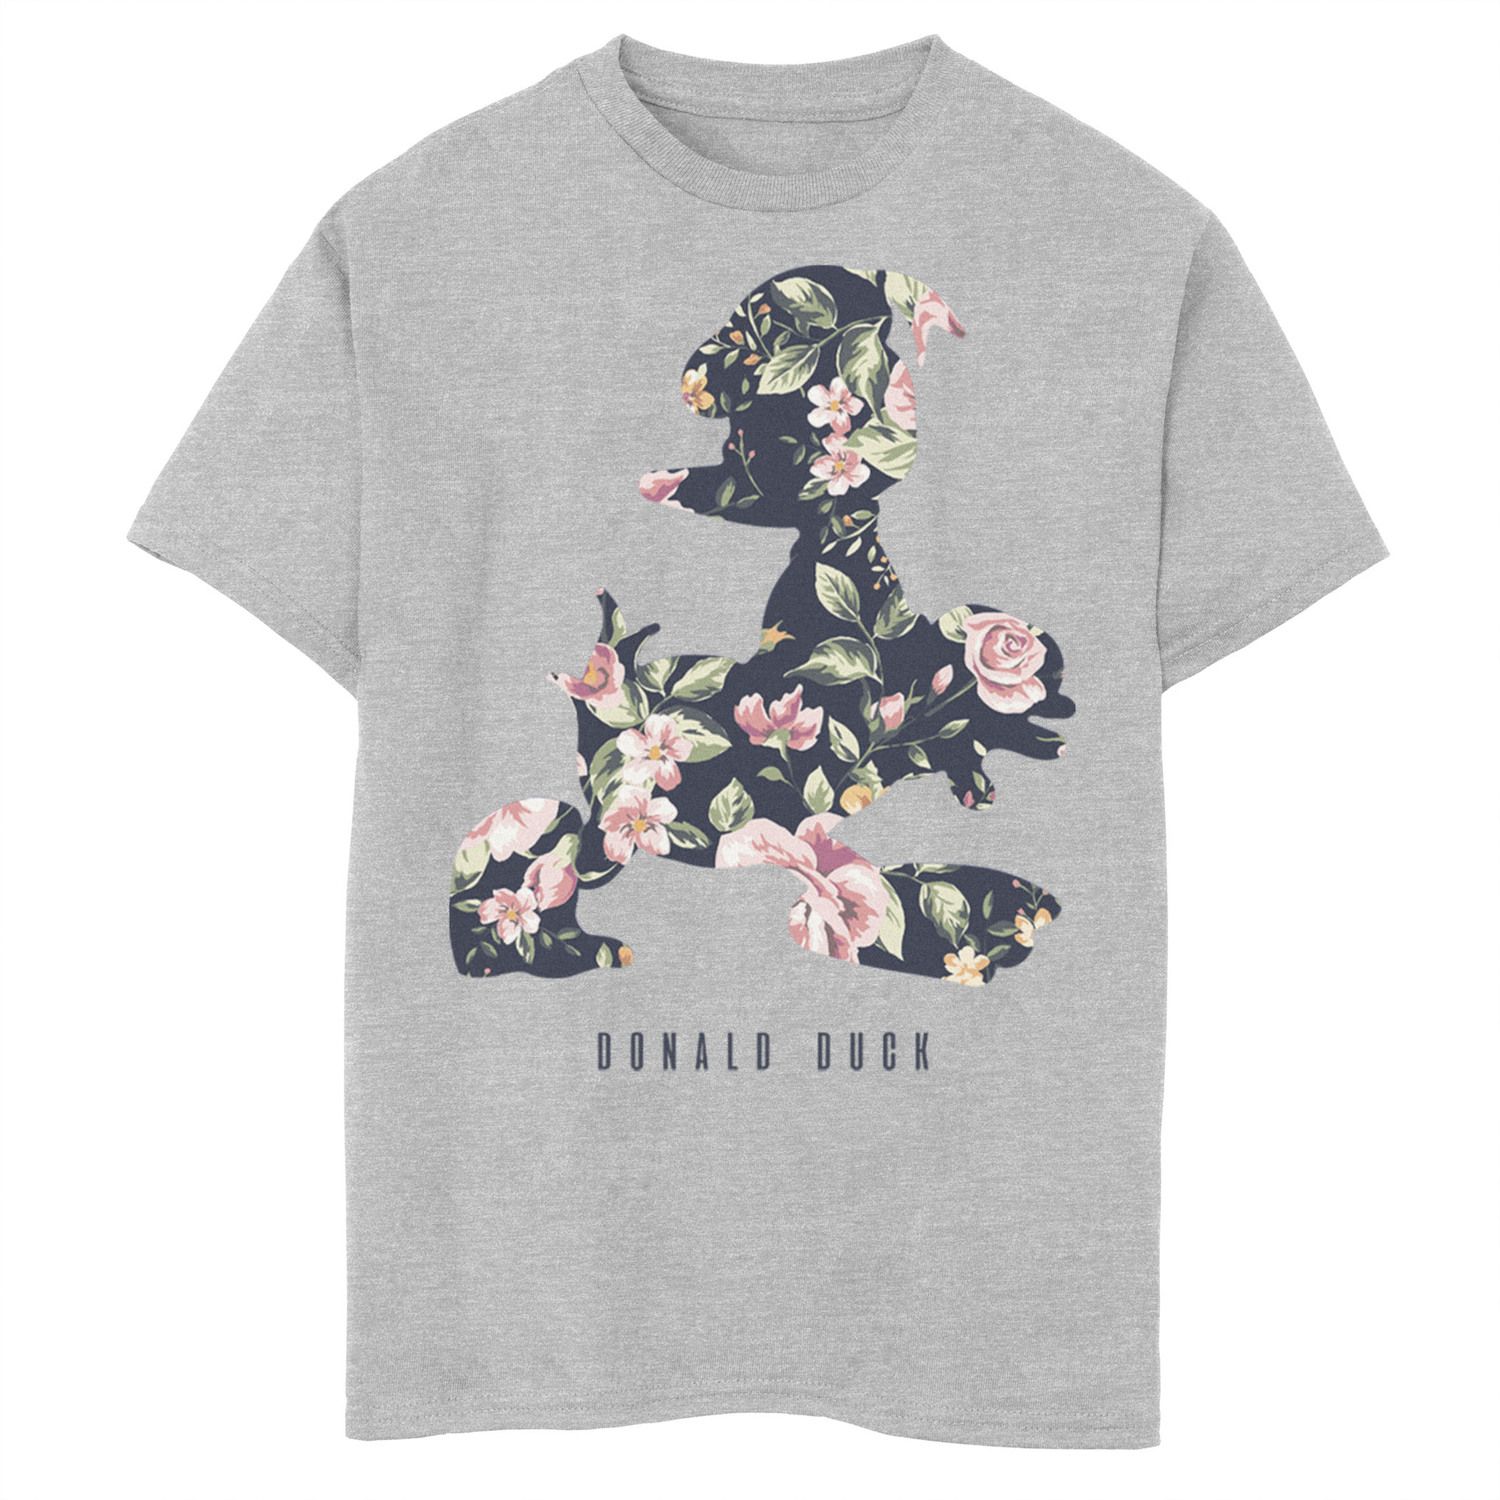 Image for Disney 's Donald Duck Boys 8-20 Floral Fill Silhouette Graphic Tee at Kohl's.